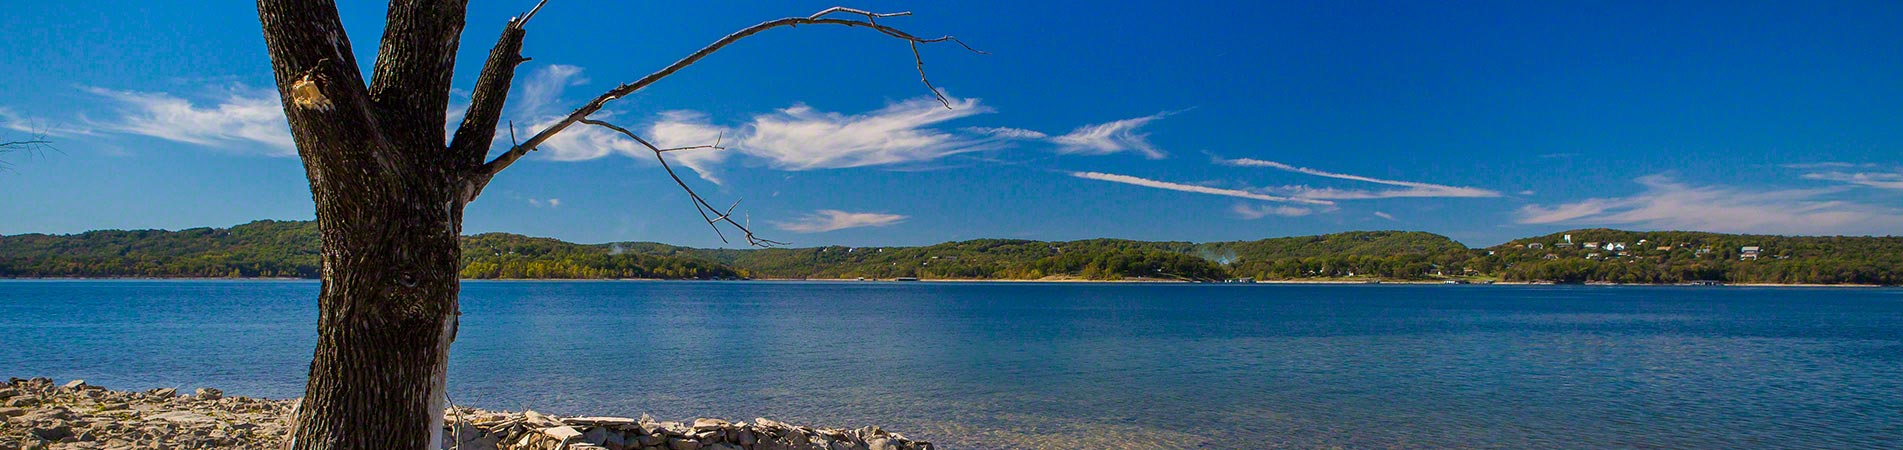 Excellent photograph taken from the shore of the Table Rock Lake in Branson, MO.